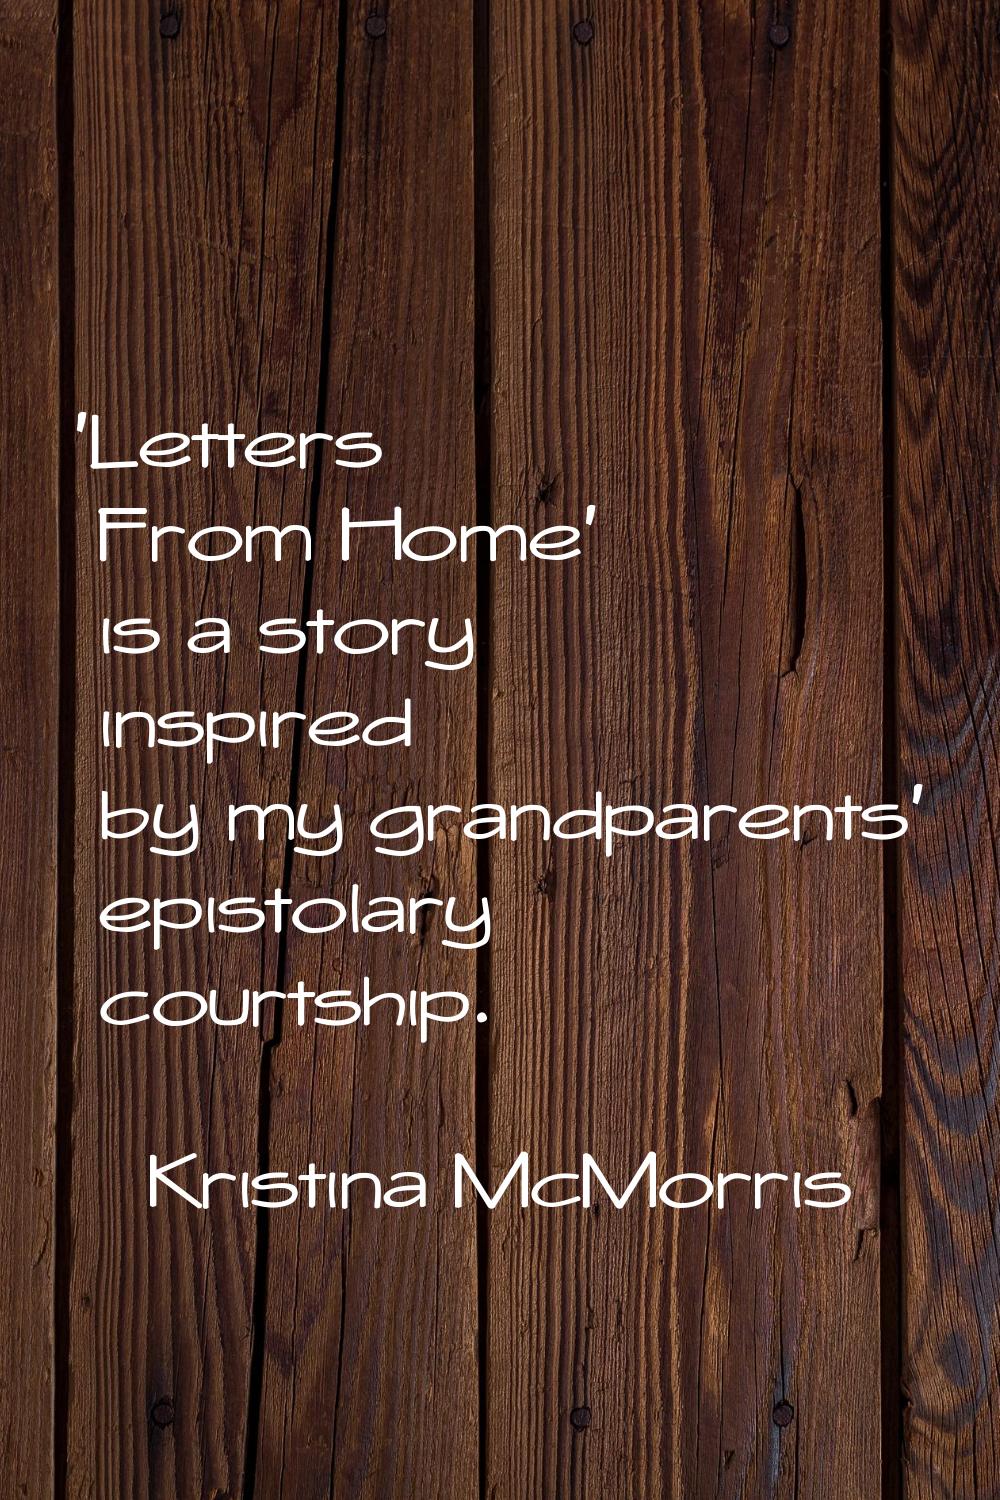 'Letters From Home' is a story inspired by my grandparents' epistolary courtship.